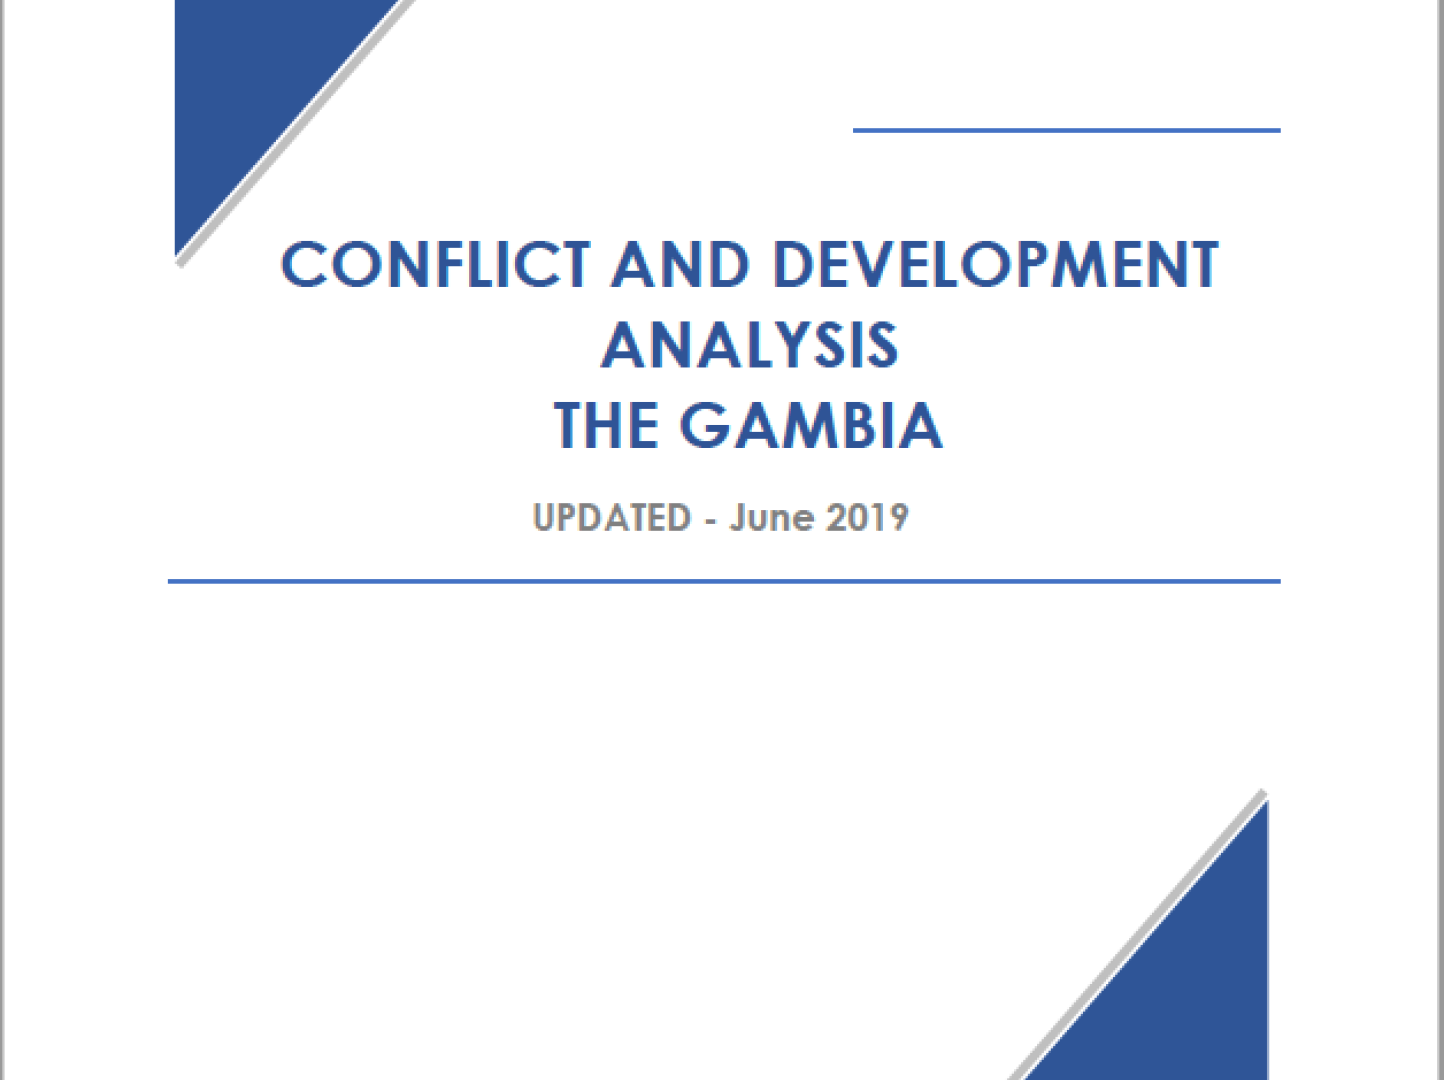 CONFLICT AND DEVELOPMENT ANALYSIS THE GAMBIA UPDATED - June 2019